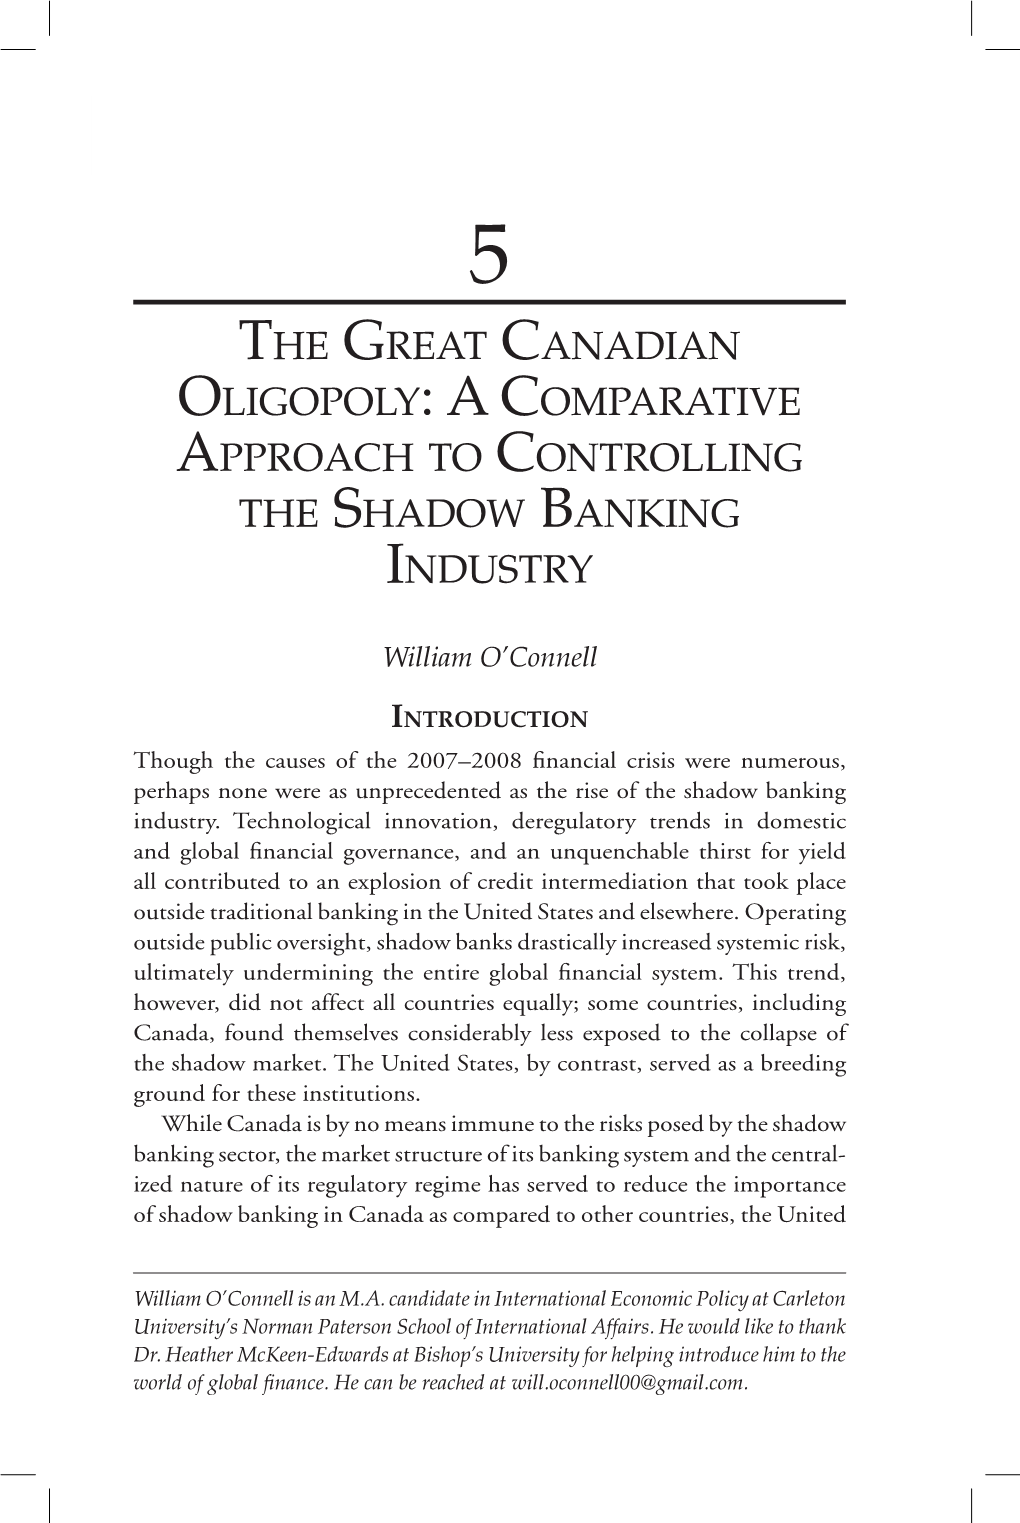 The Great Canadian Oligopoly: a Comparative Approach to Controlling the Shadow Banking Industry